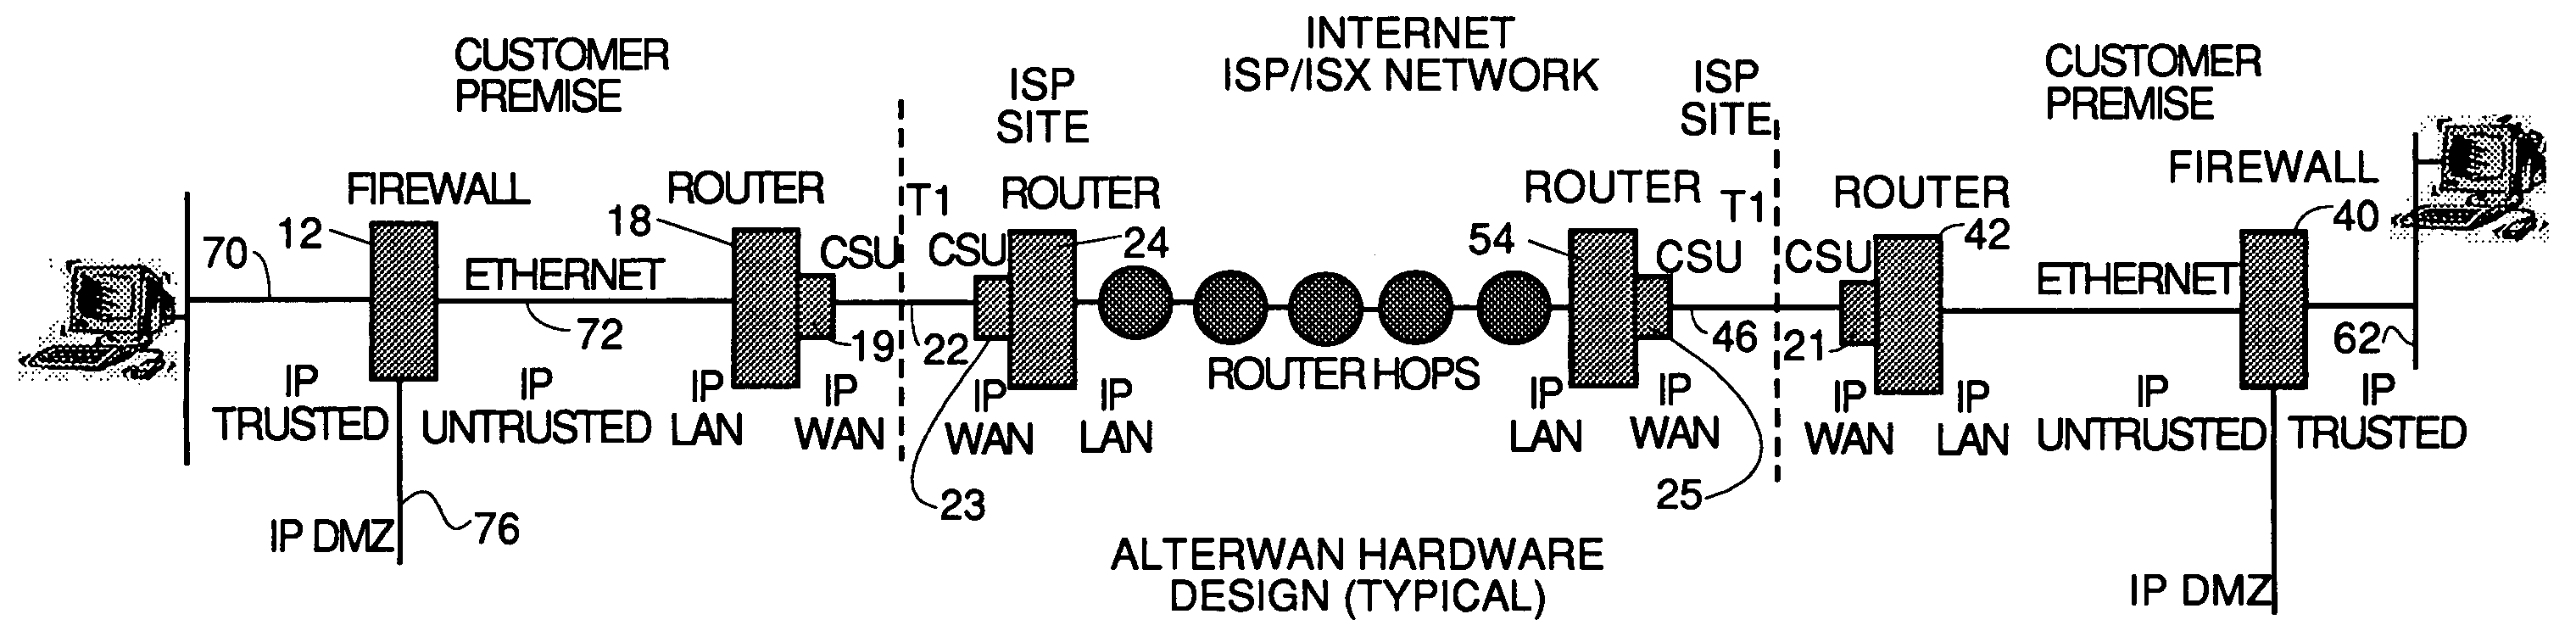 Wide area network using internet with quality of service